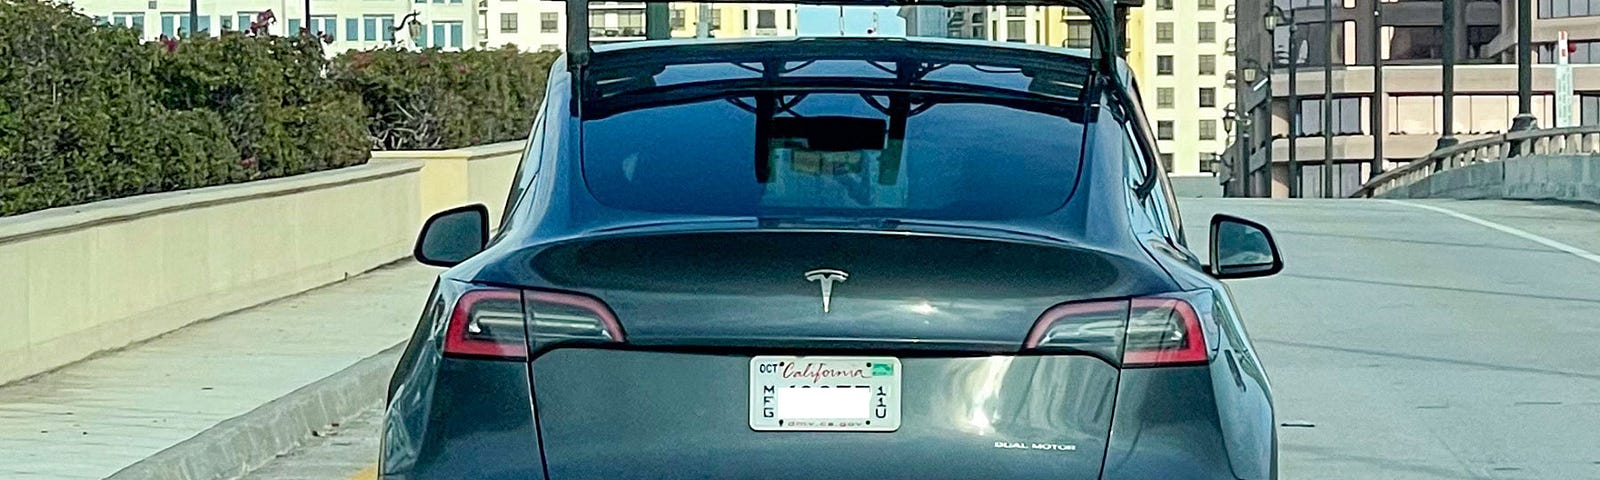 A grey Tesla seen from the rear with a large roof-mounted rack holding a lidar sensor array.